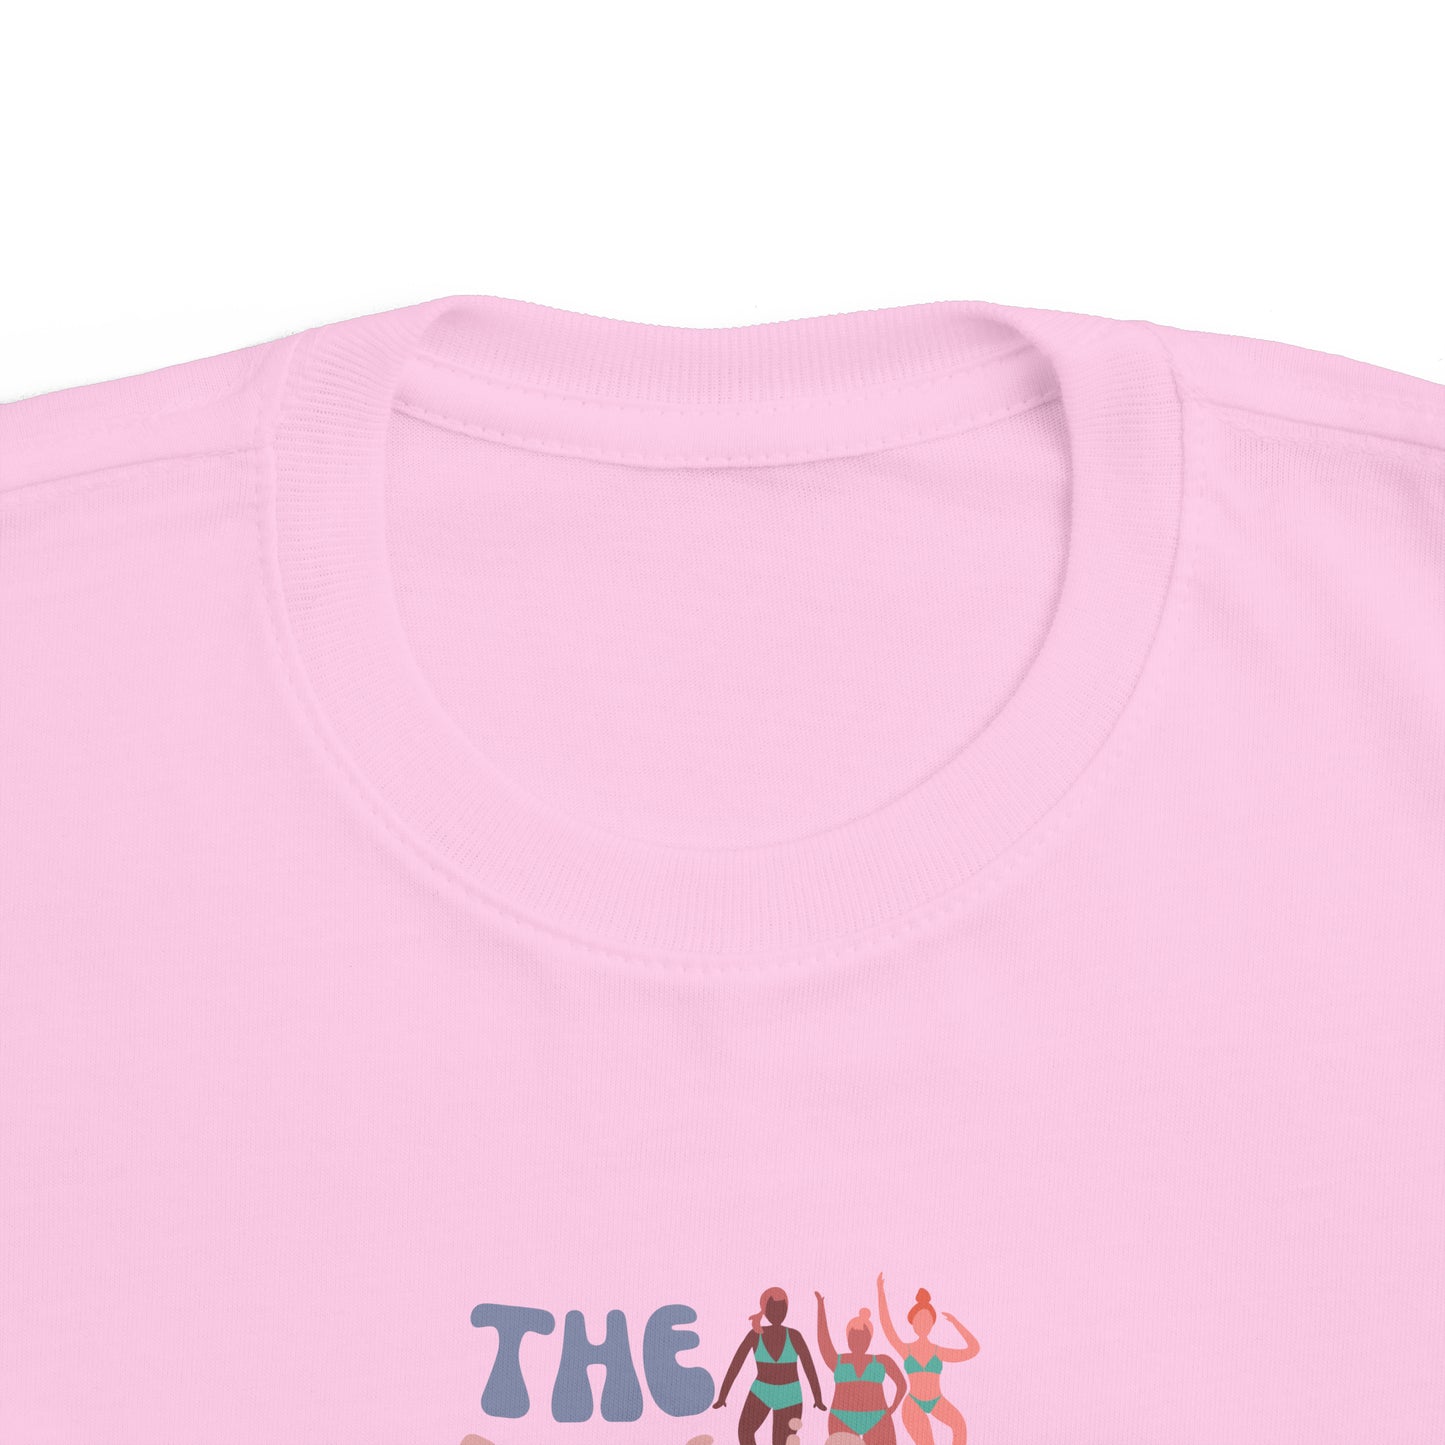 FUTURE IS FEMALE T-shirt - toddler